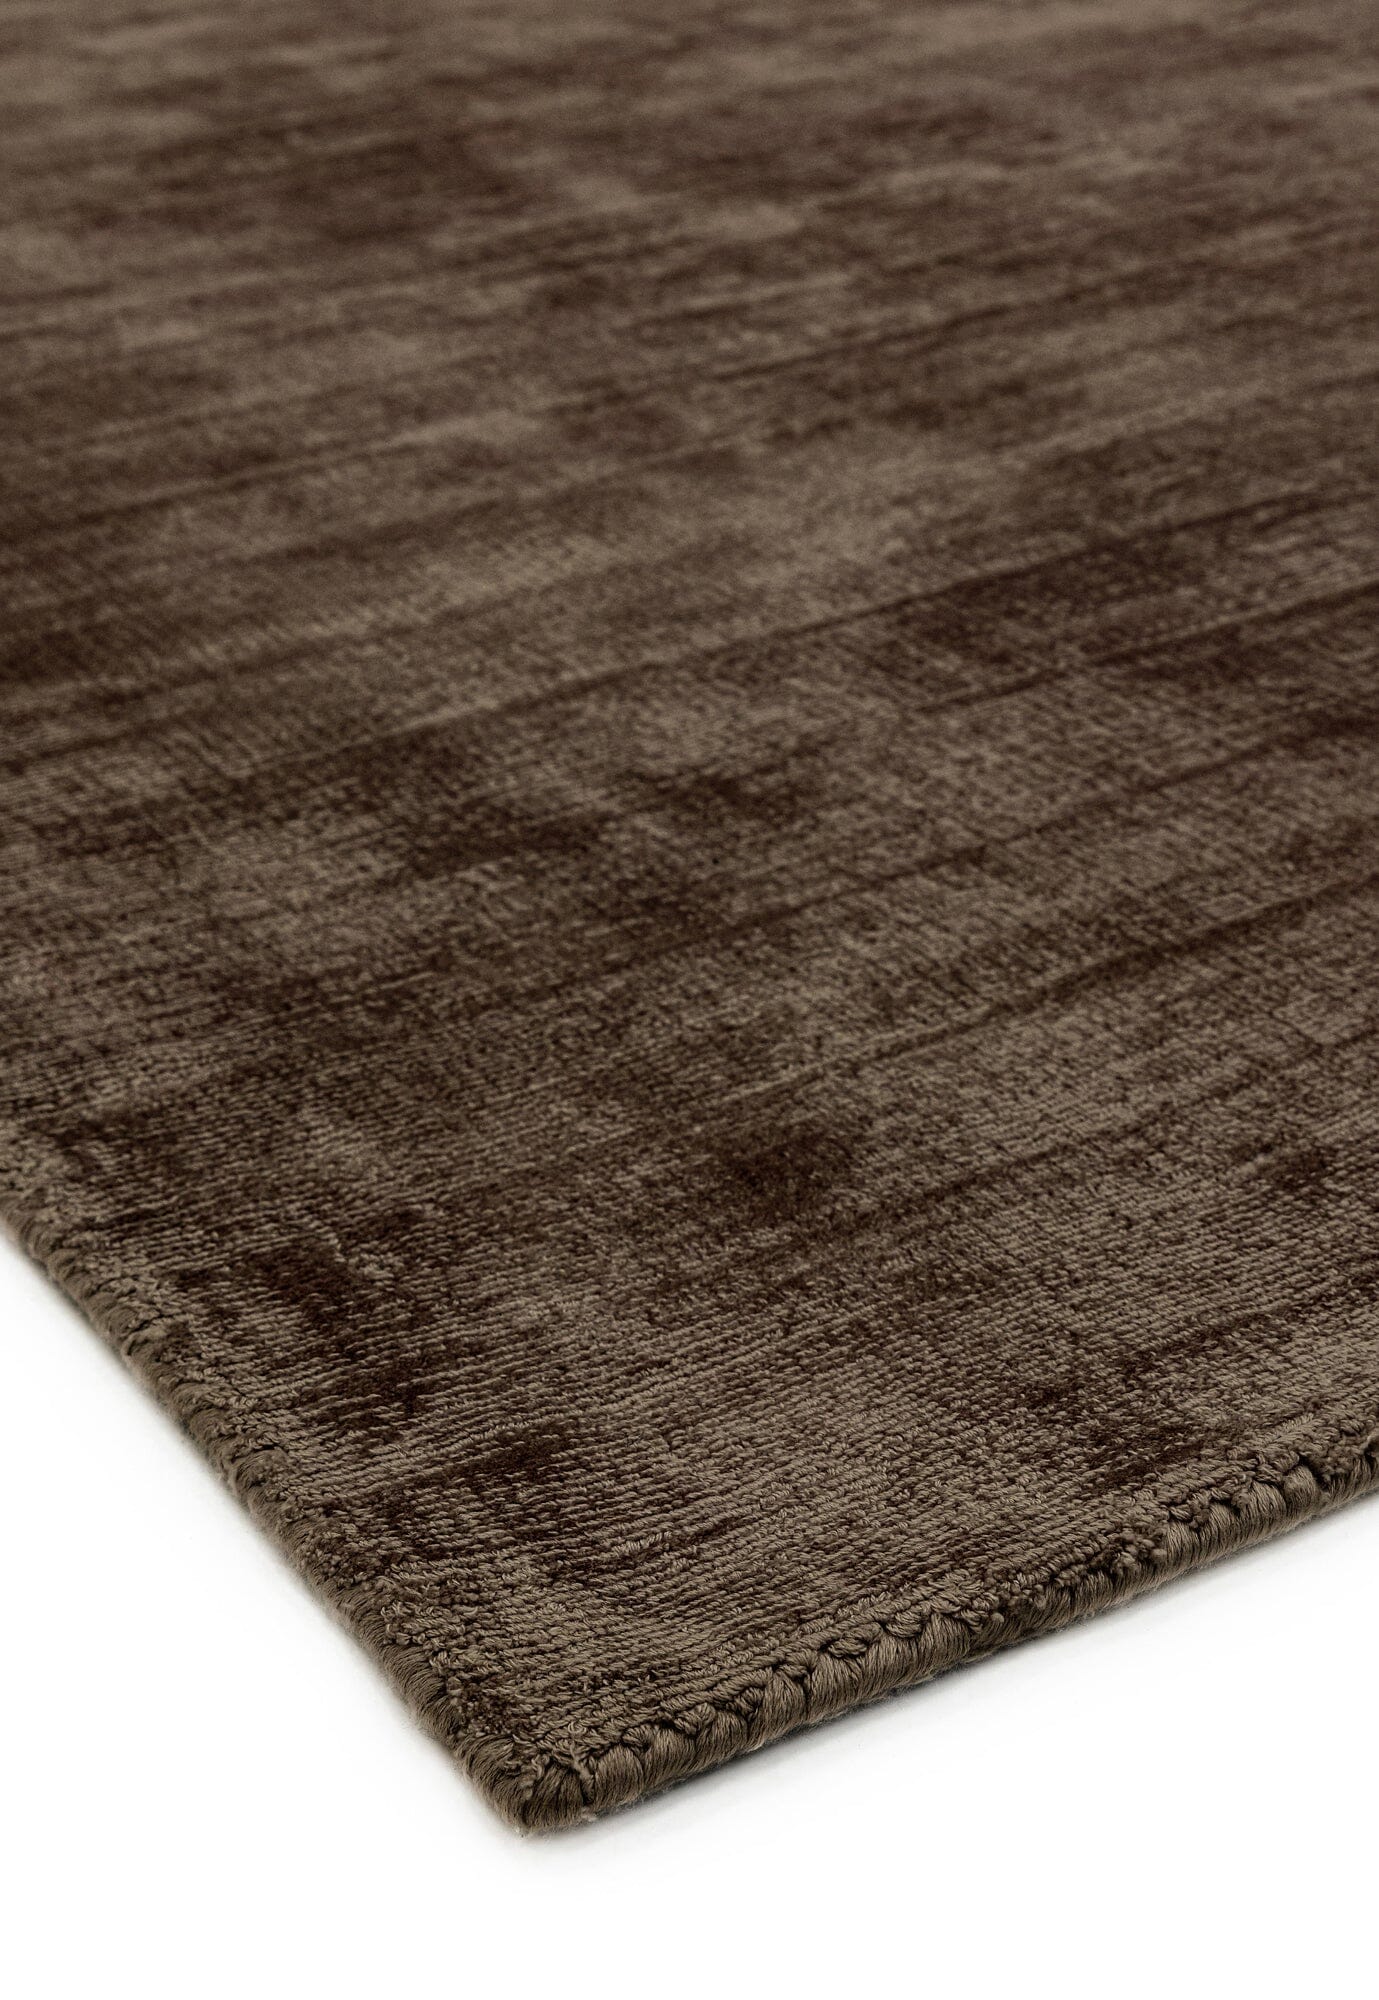  Asiatic Carpets-Asiatic Carpets Blade Hand Woven Runner Chocolate - 66 x 240cm-Brown 397 